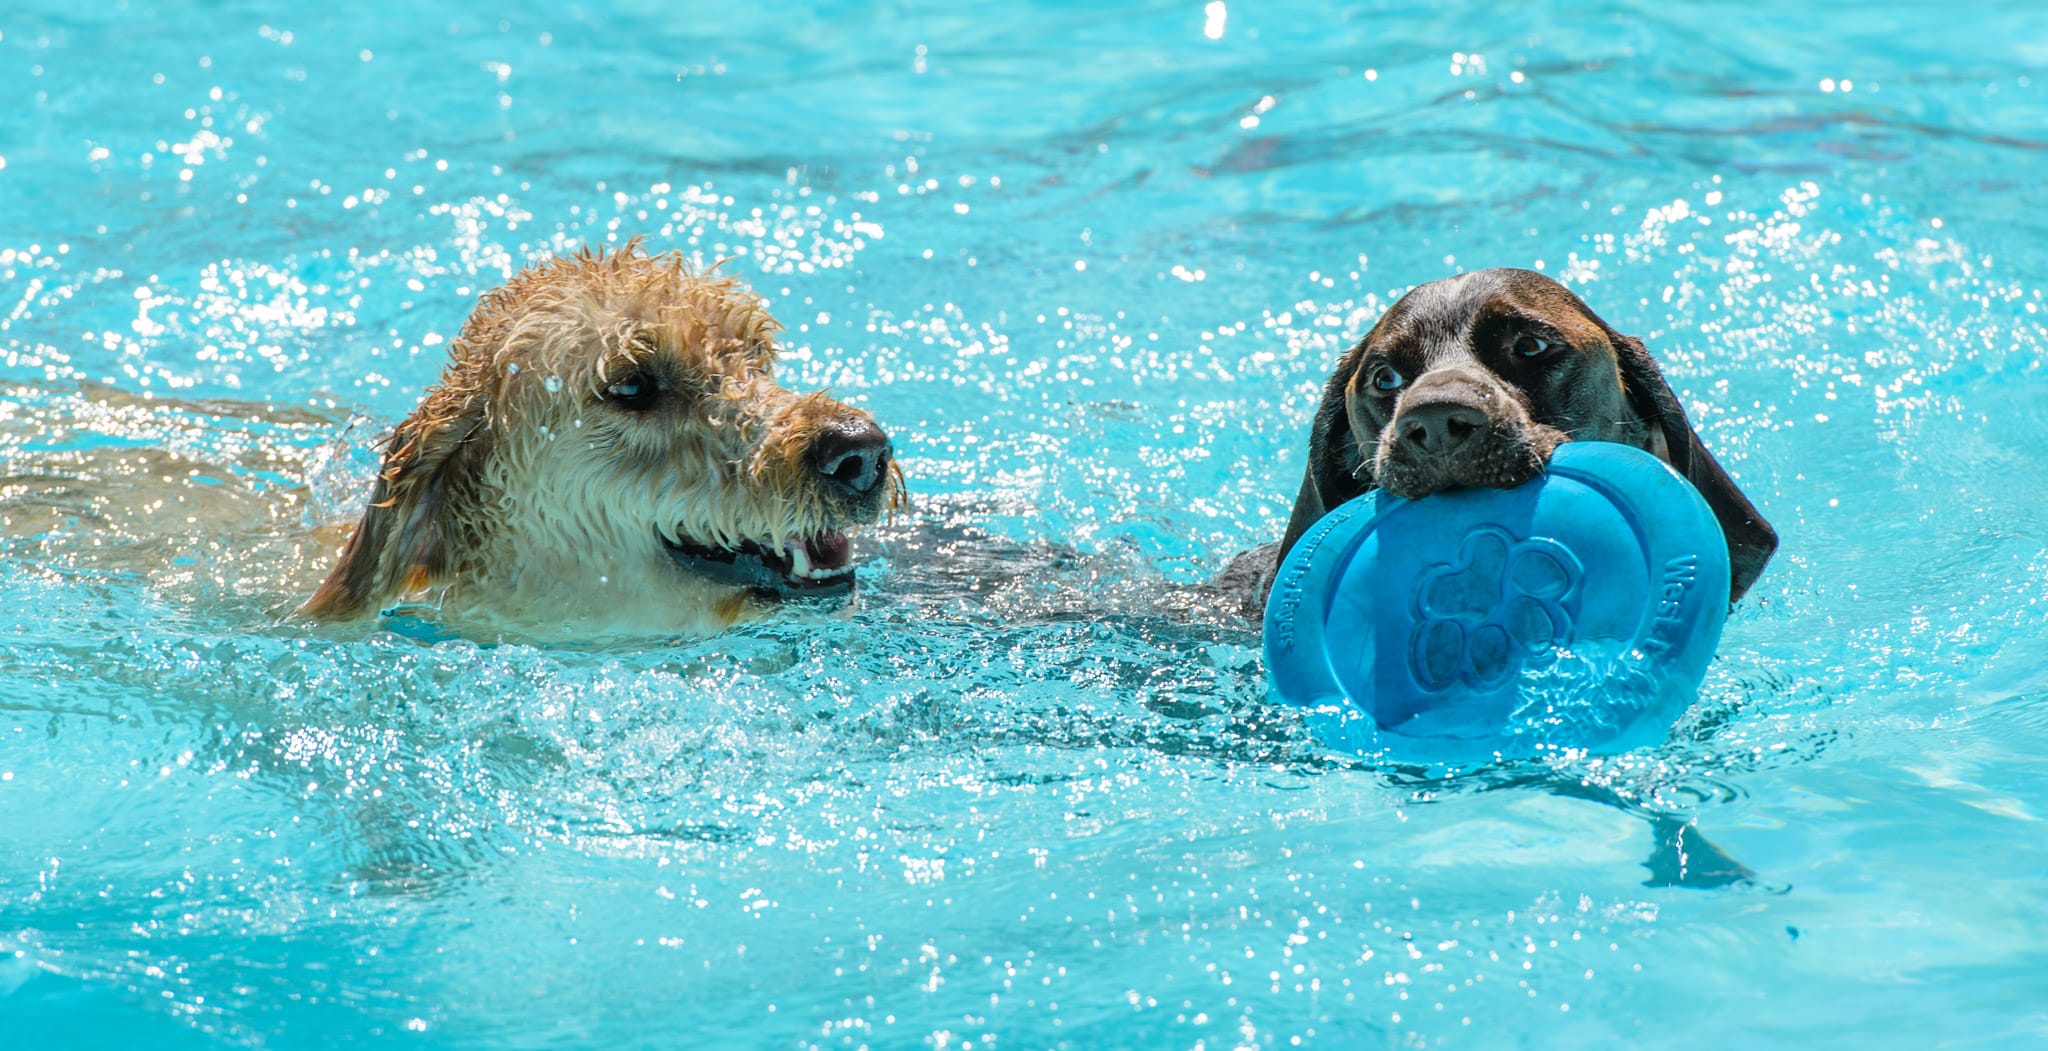 The end of summer is celebrated in Boulder, Colorado, by allowing dogs to take over Scott Carpenter pool in early September.